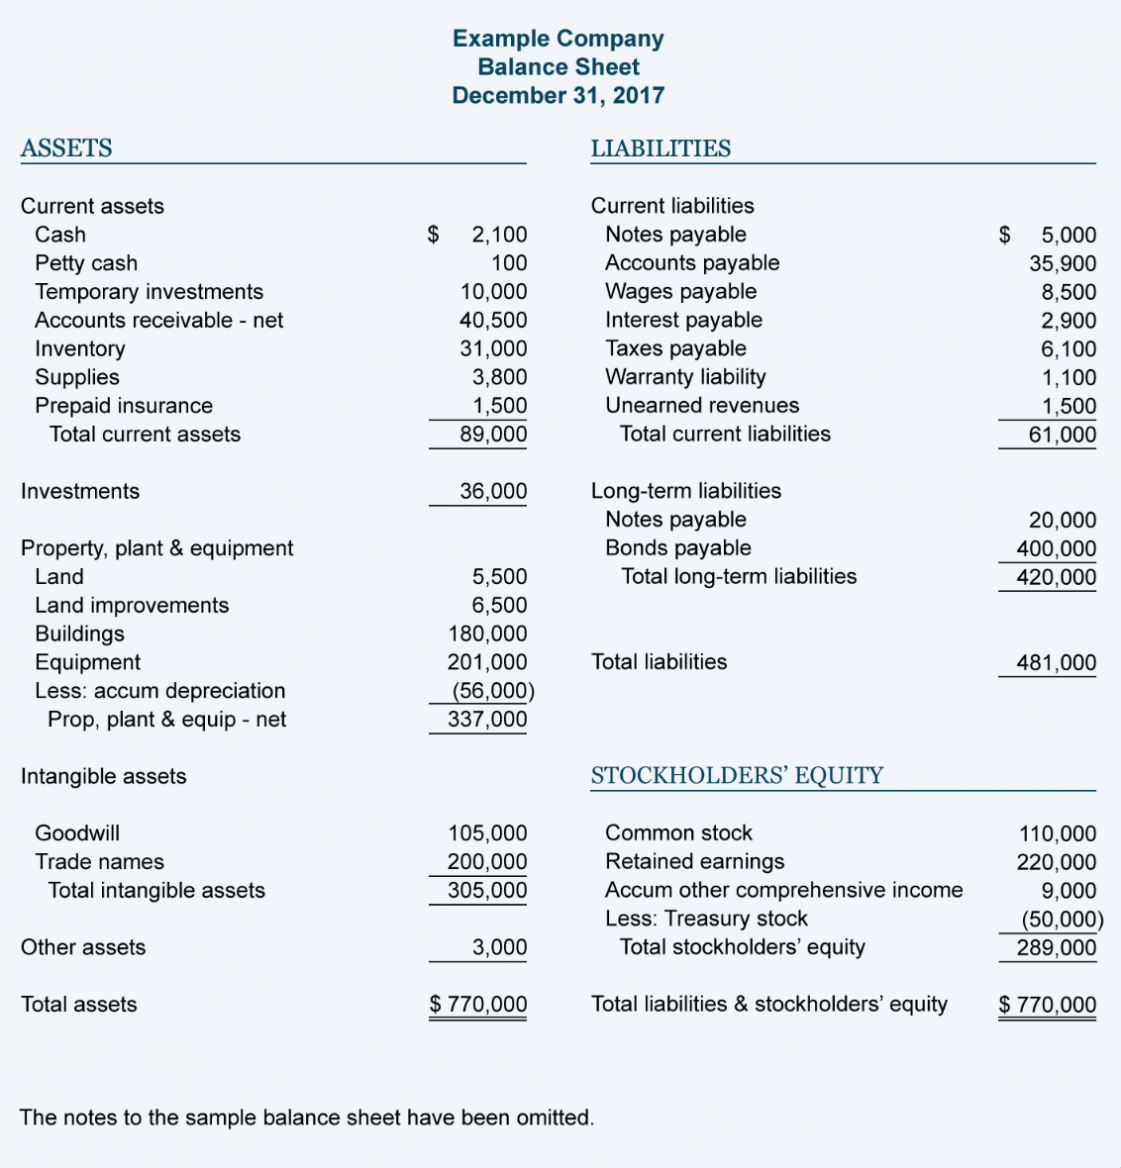 Sample Balance Sheet And Income Statement For Small Business regarding Financial Statement Template For Small Business